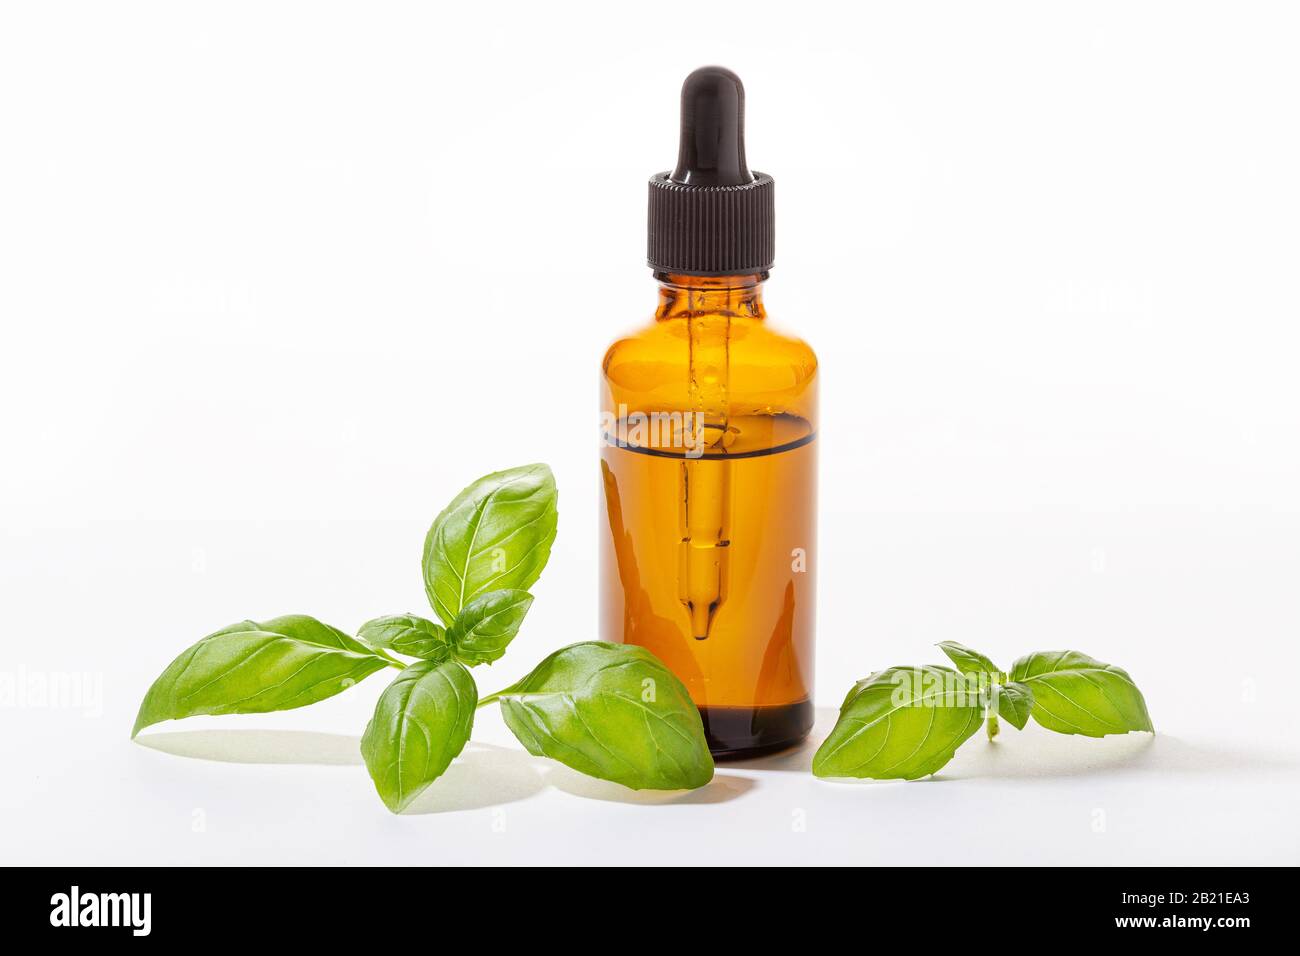 Basil essential oil isolated on white background. Basil oil for skin care, aromatherapy and natural medicine Stock Photo